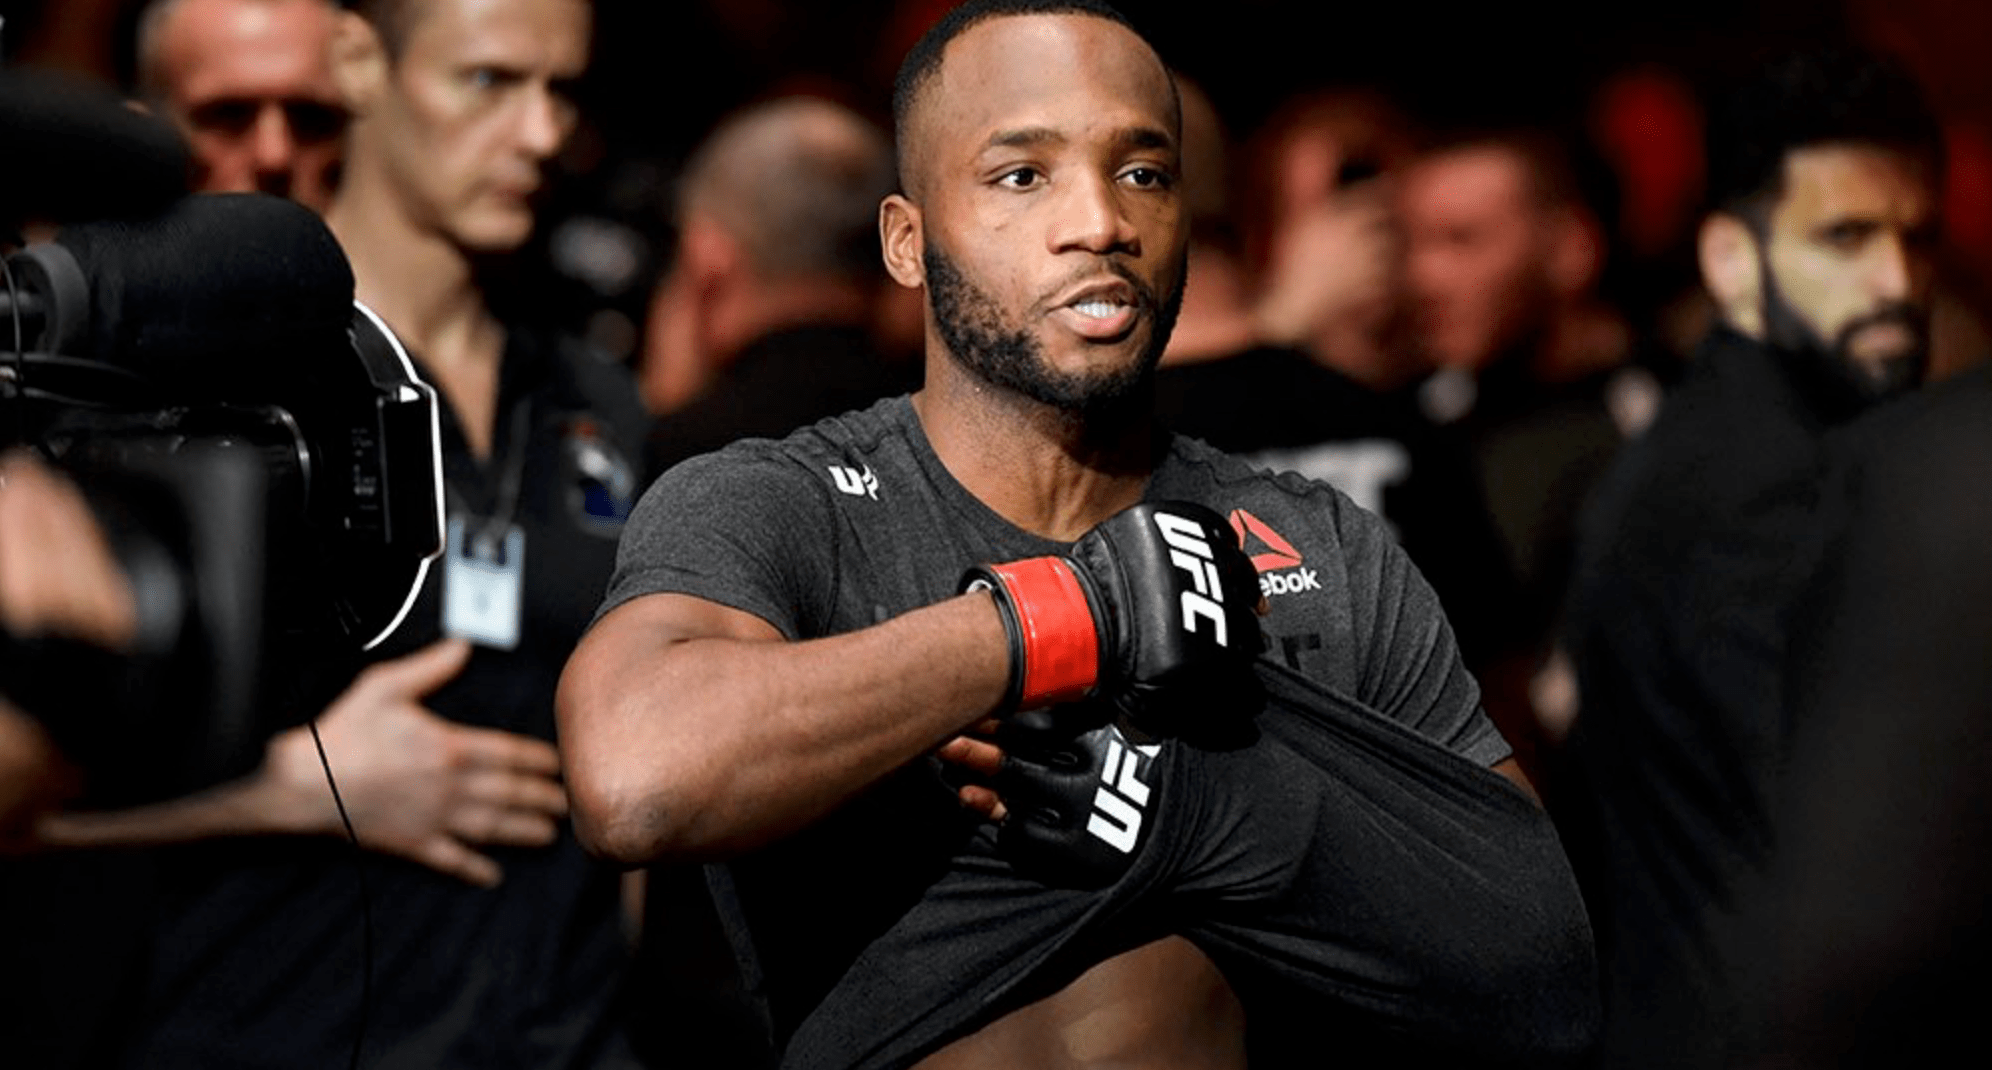 Leon Edwards Calls Out Gilbert Burns And ‘Little Weasel’ Colby Covington